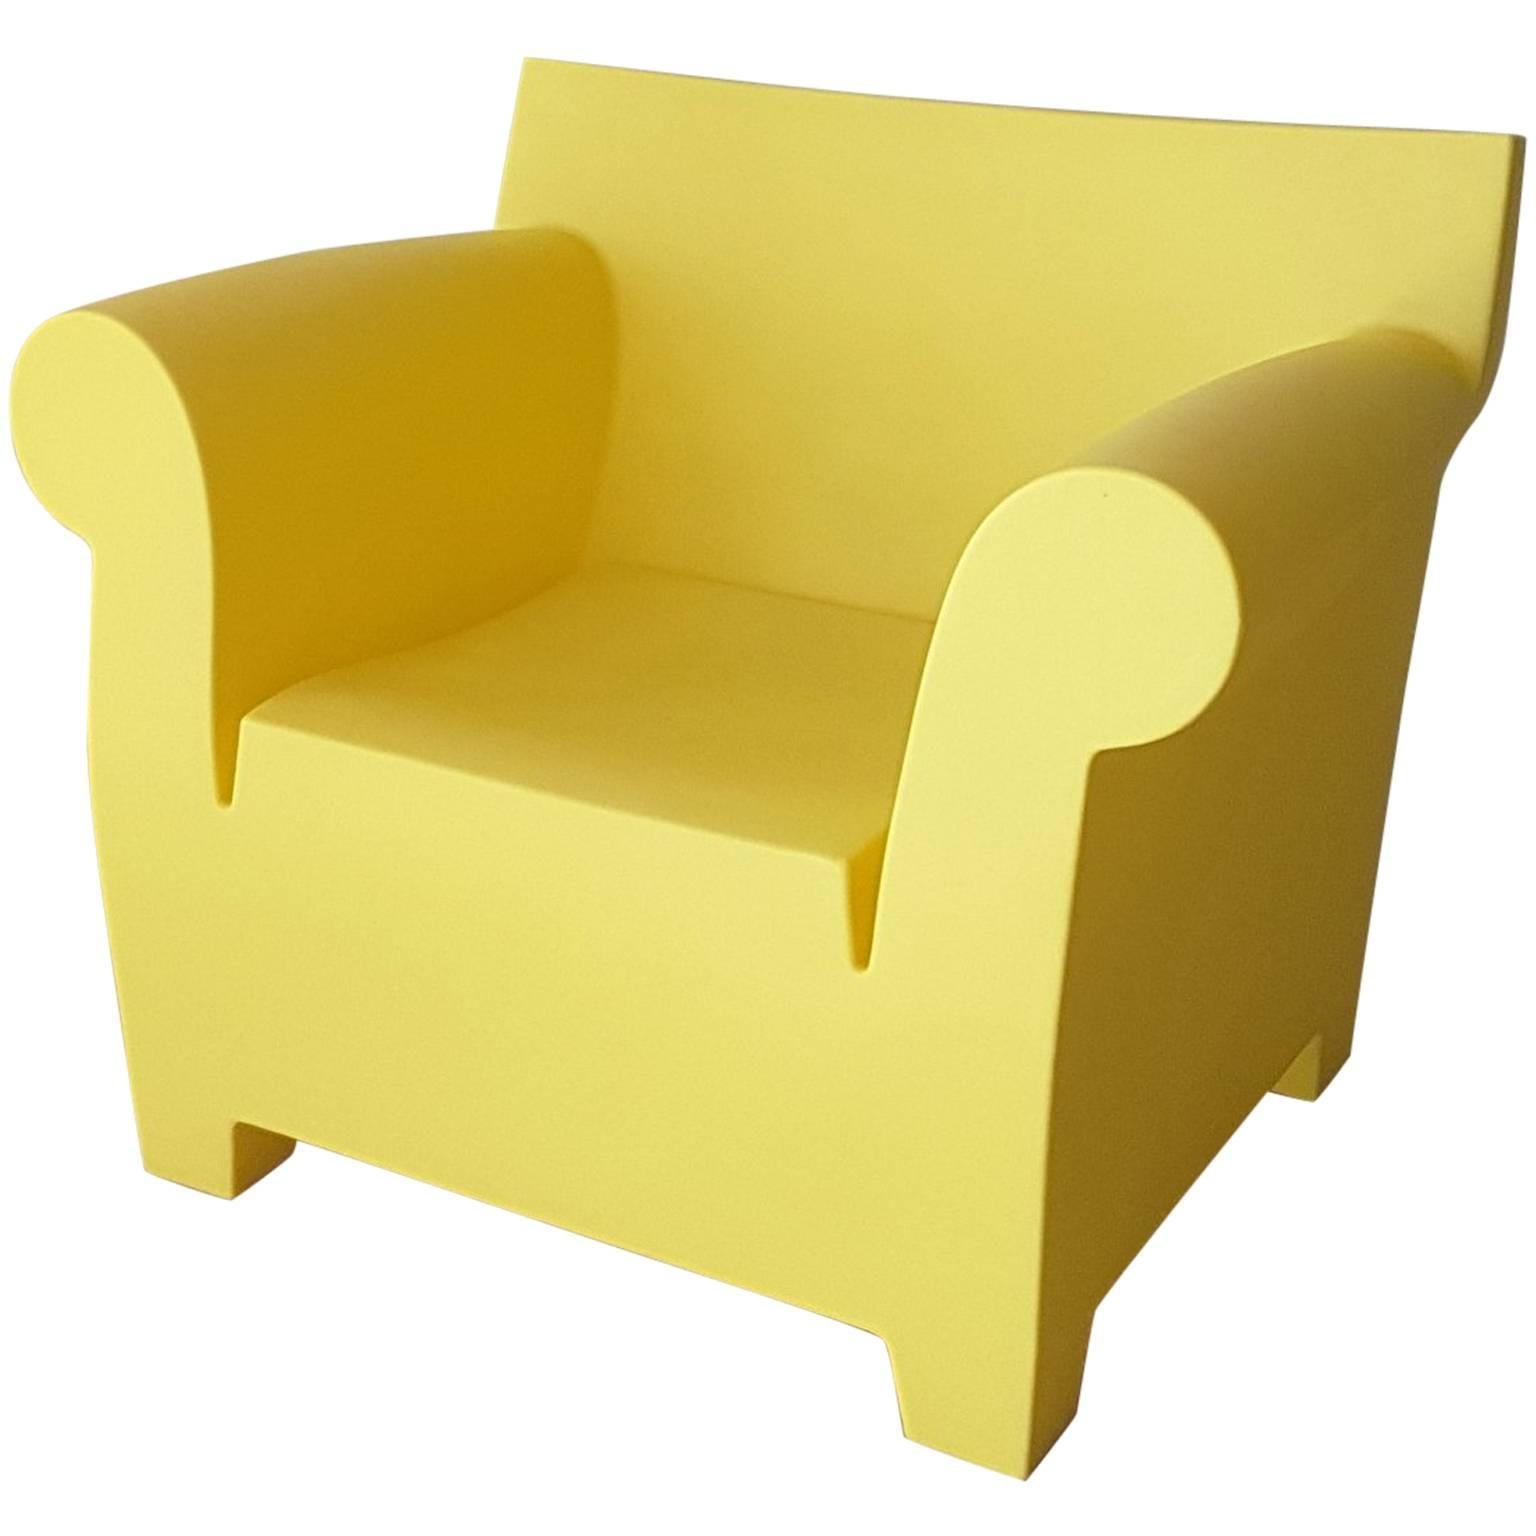 Yellow Outdoor Armchair by Philippe Starck / Kartell Compasso d'oro Award, 2001